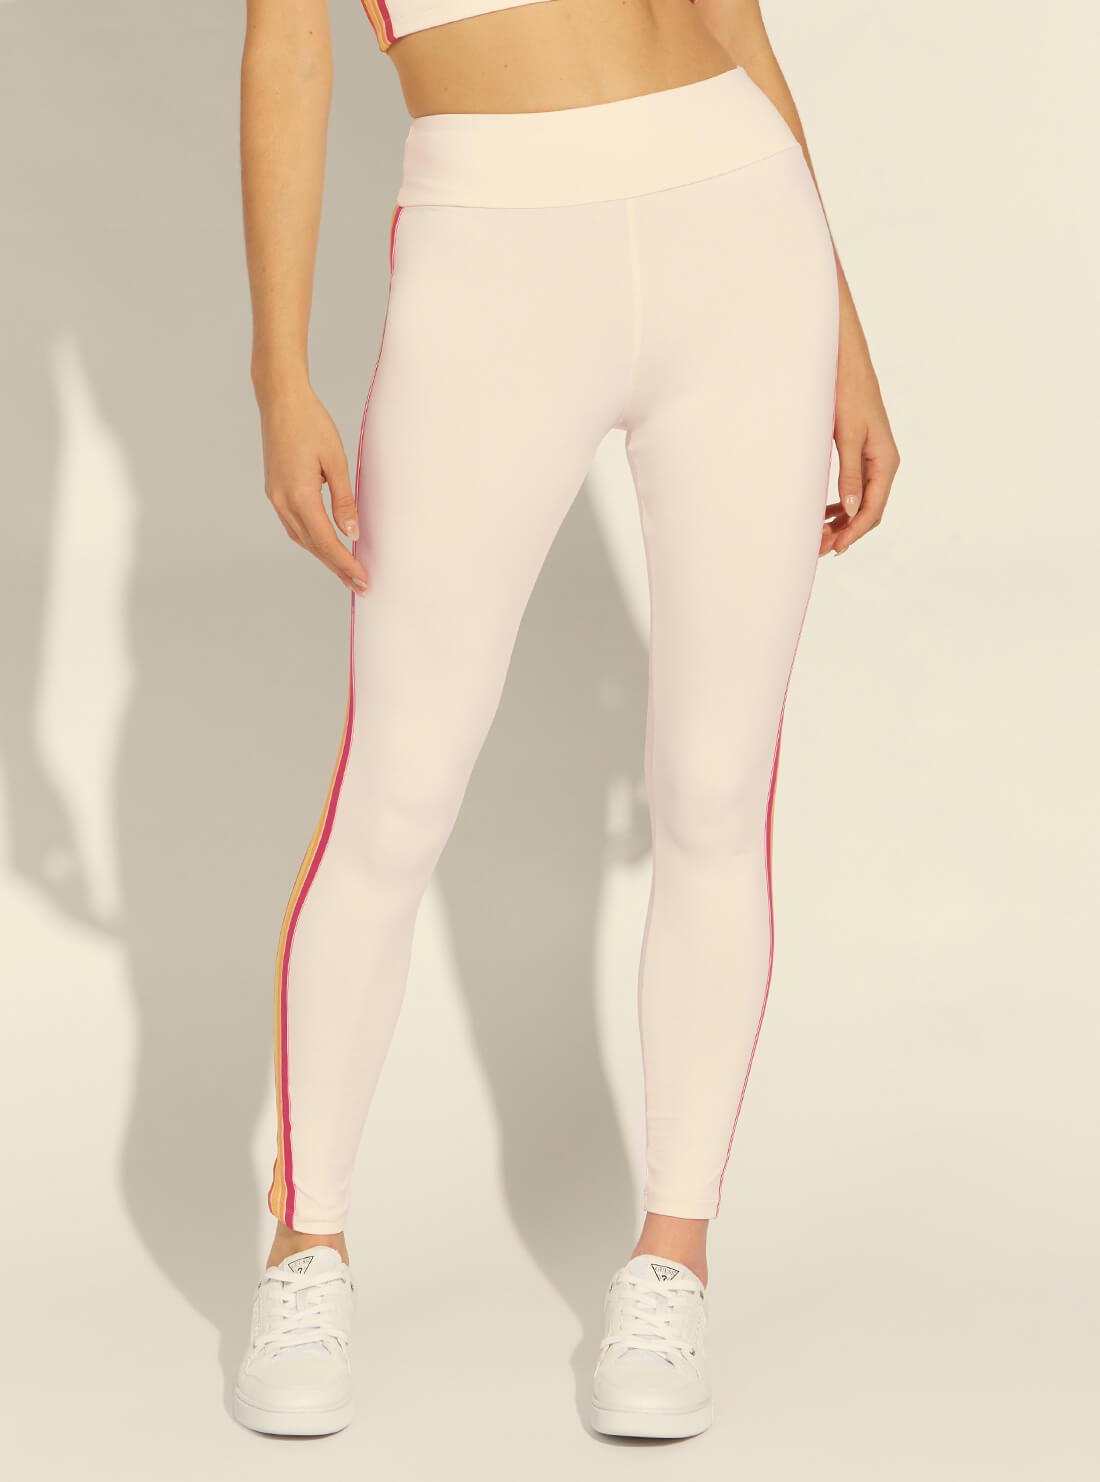 GUESS White Multi Brittany Active Leggings front view